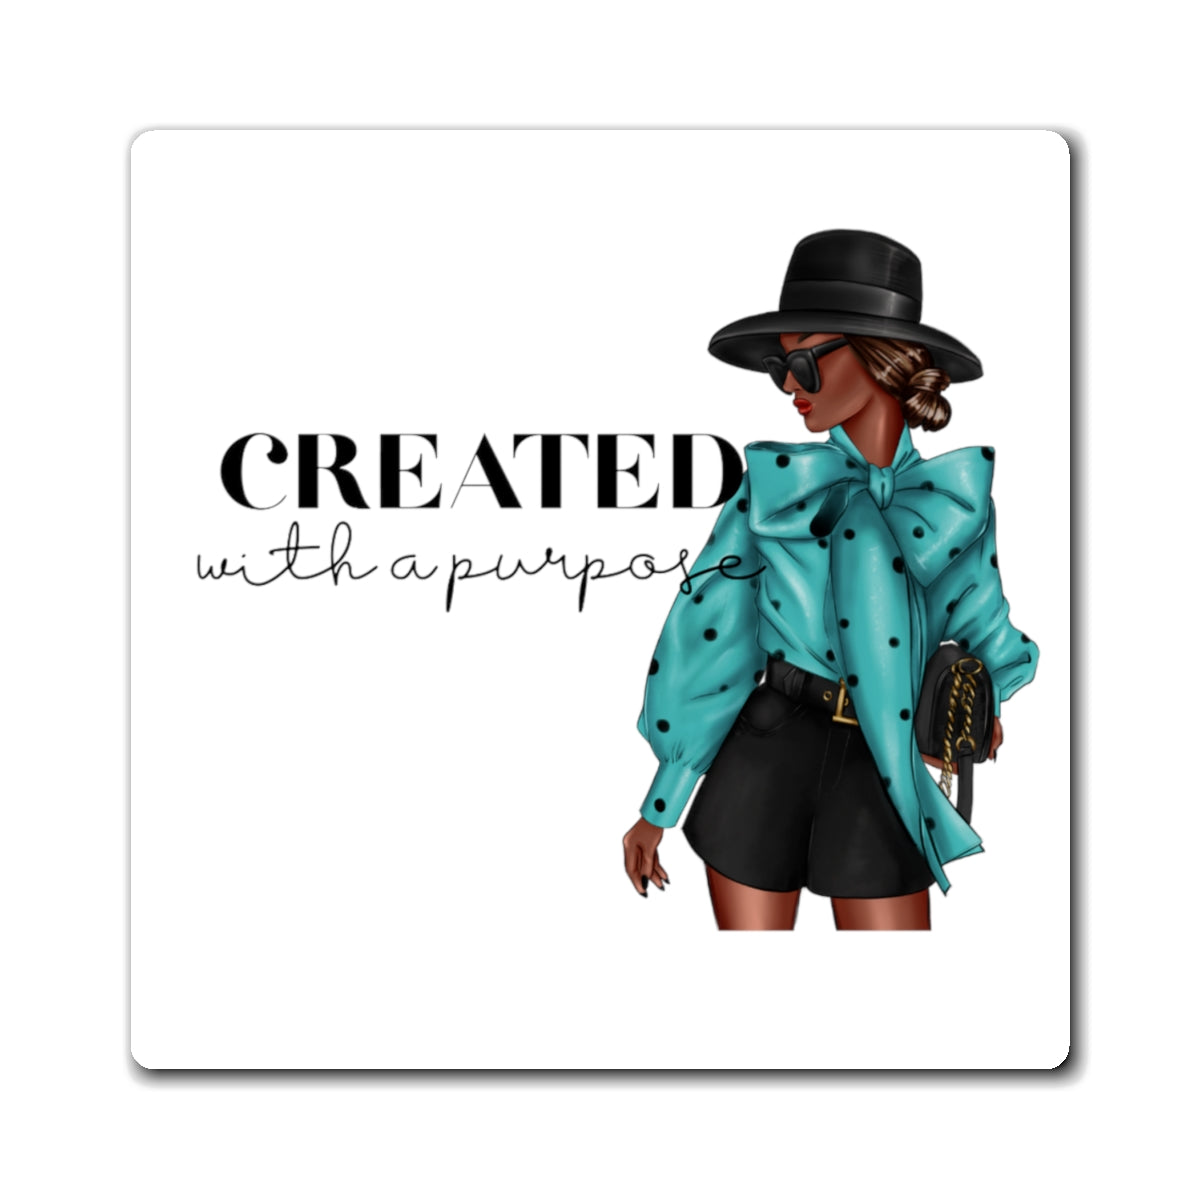 Created with a Purpose Magnets| Kitchen Magnet| Magnet with Black Woman